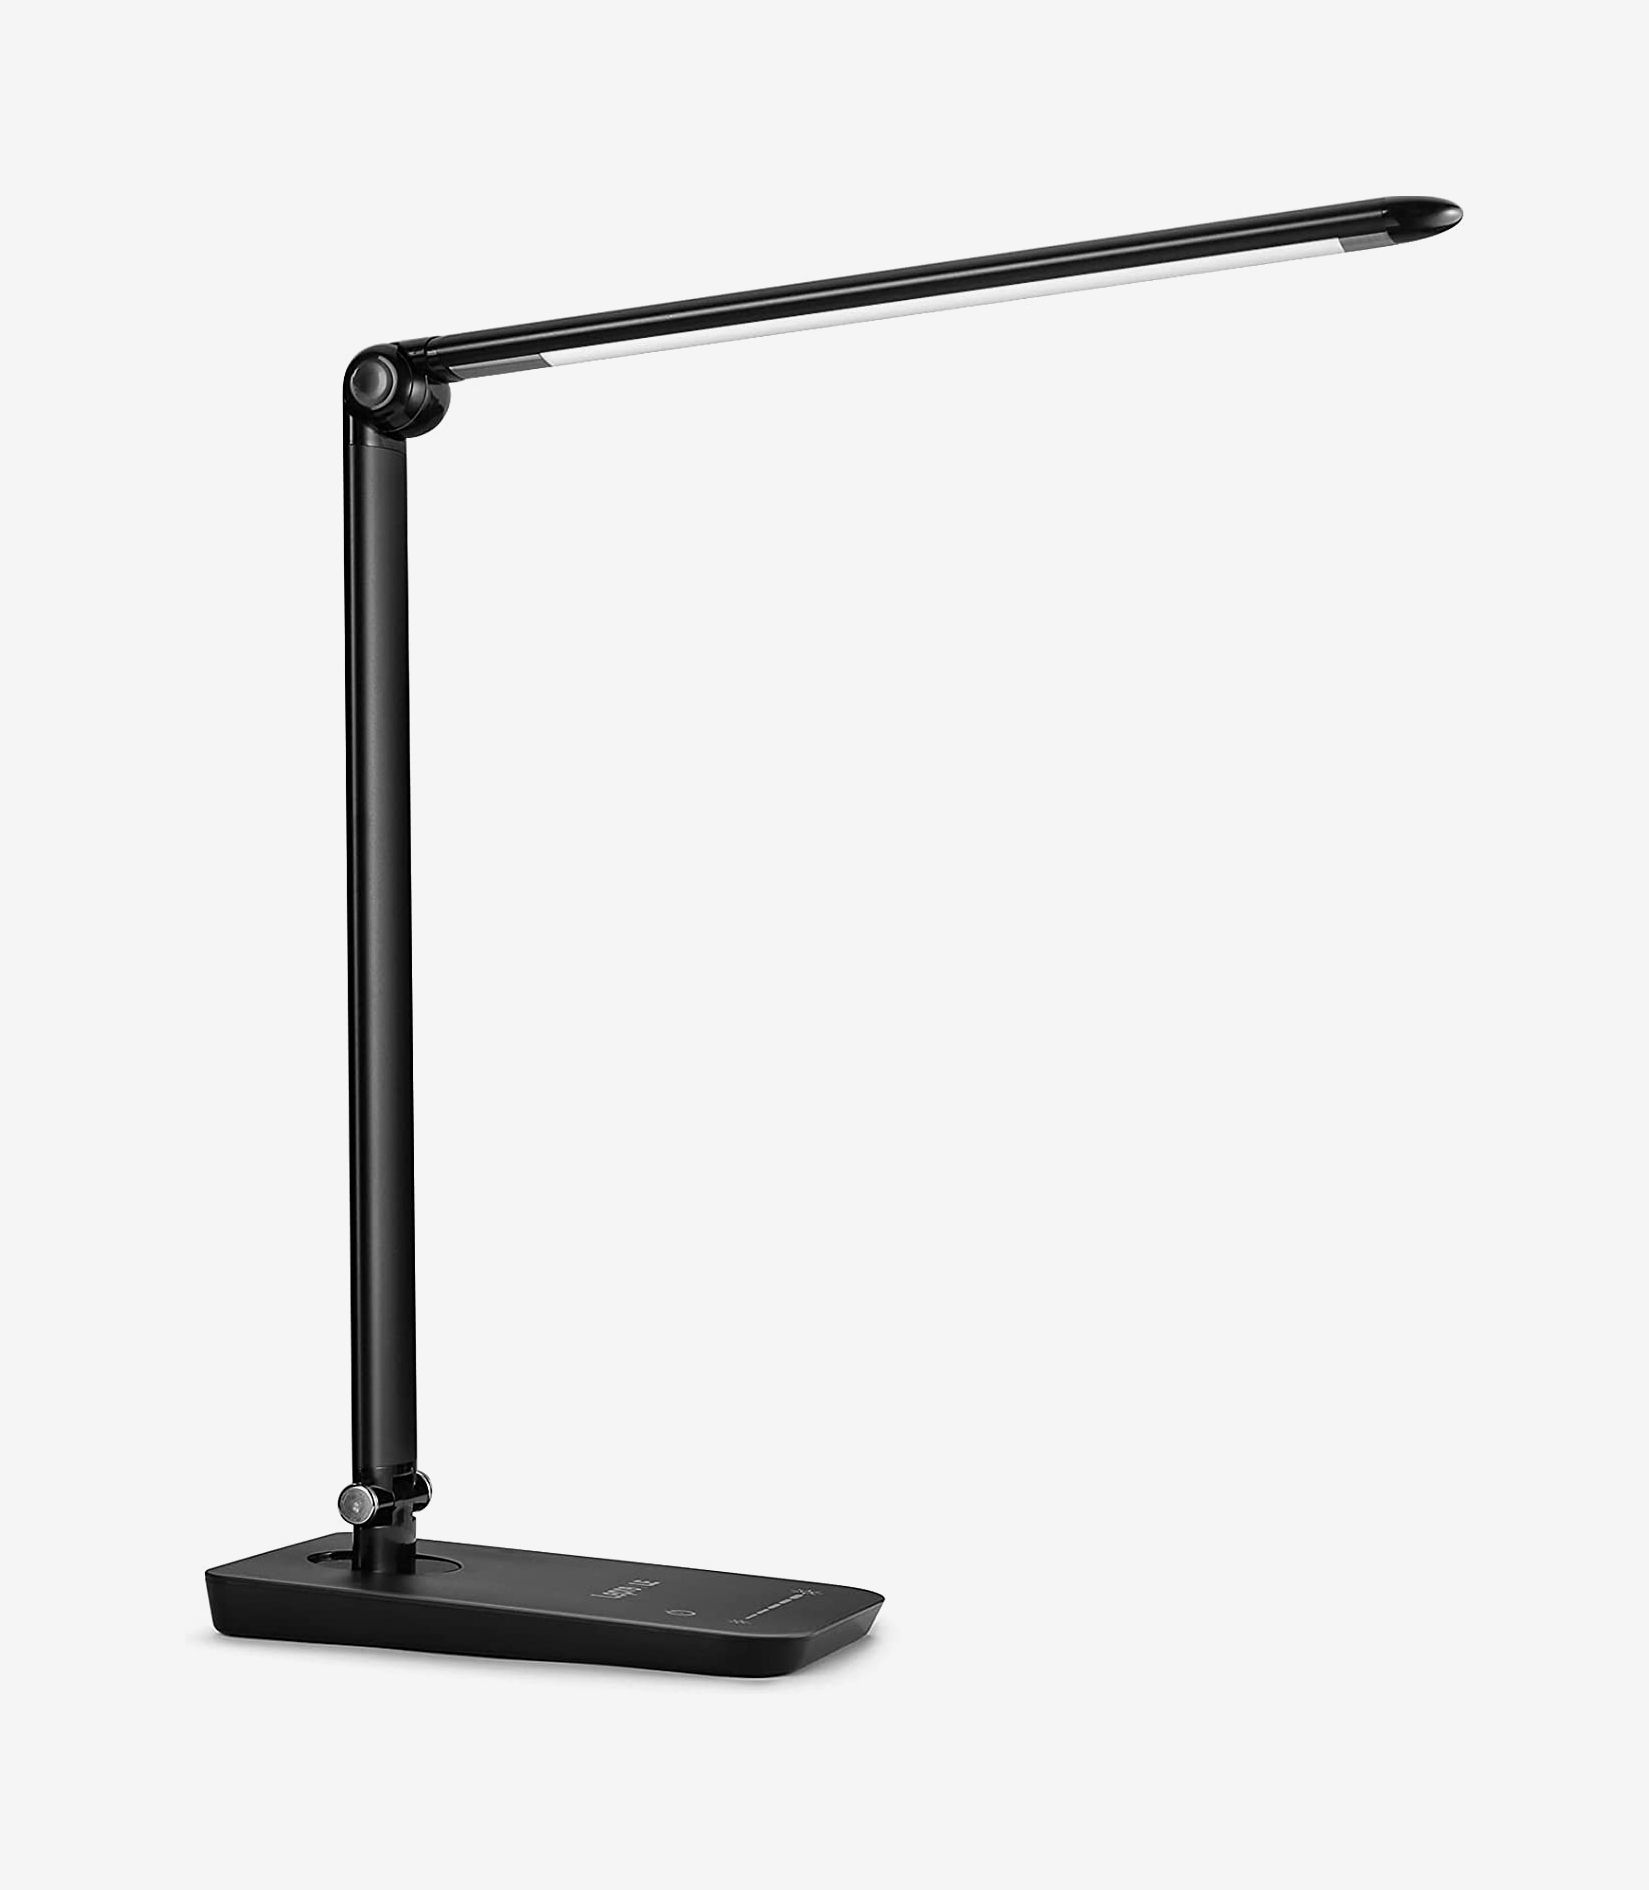 LED Learning Desk lamp can be Pasted Wall lamp Work Desk lamp Touch dimming Bedroom lamp stepless dimming USB Rechargeable Night lamp 3 Color Modes 